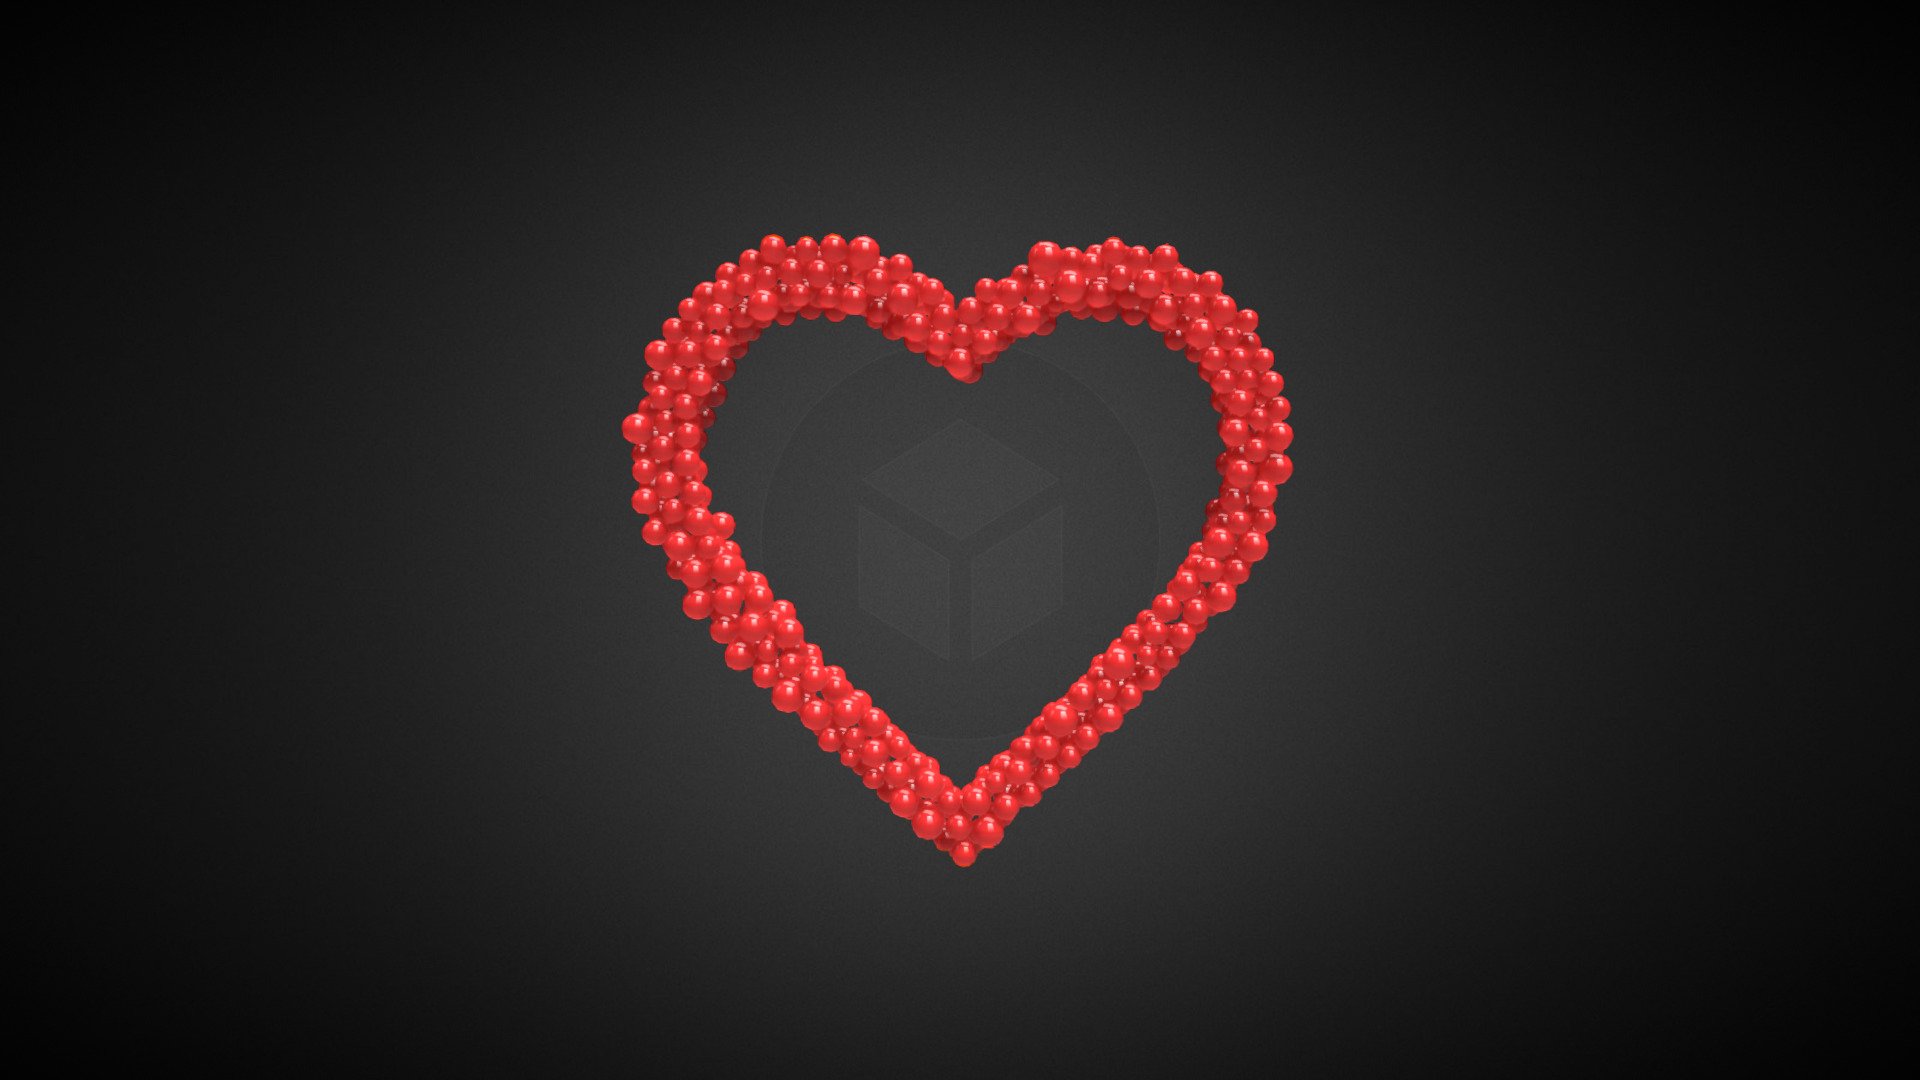 Animated spheres forming outline heart shape made in Houdini. Stored as keyframed transforms via fbx.
Suitable for rendering 3d model